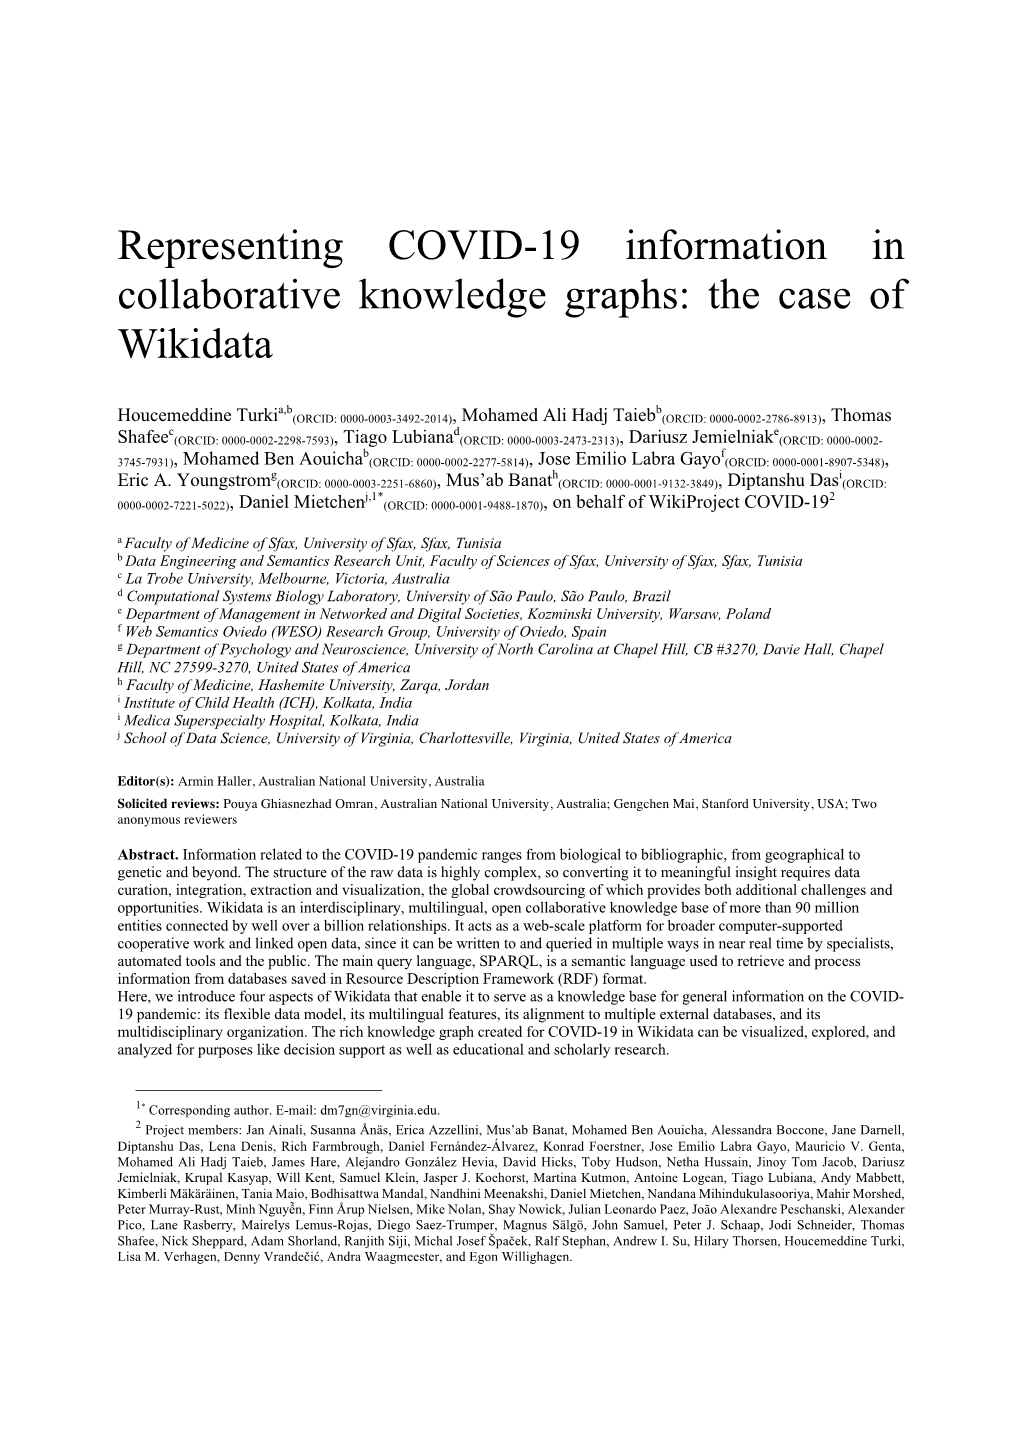 Representing COVID-19 Information in Collaborative Knowledge Graphs: the Case Of